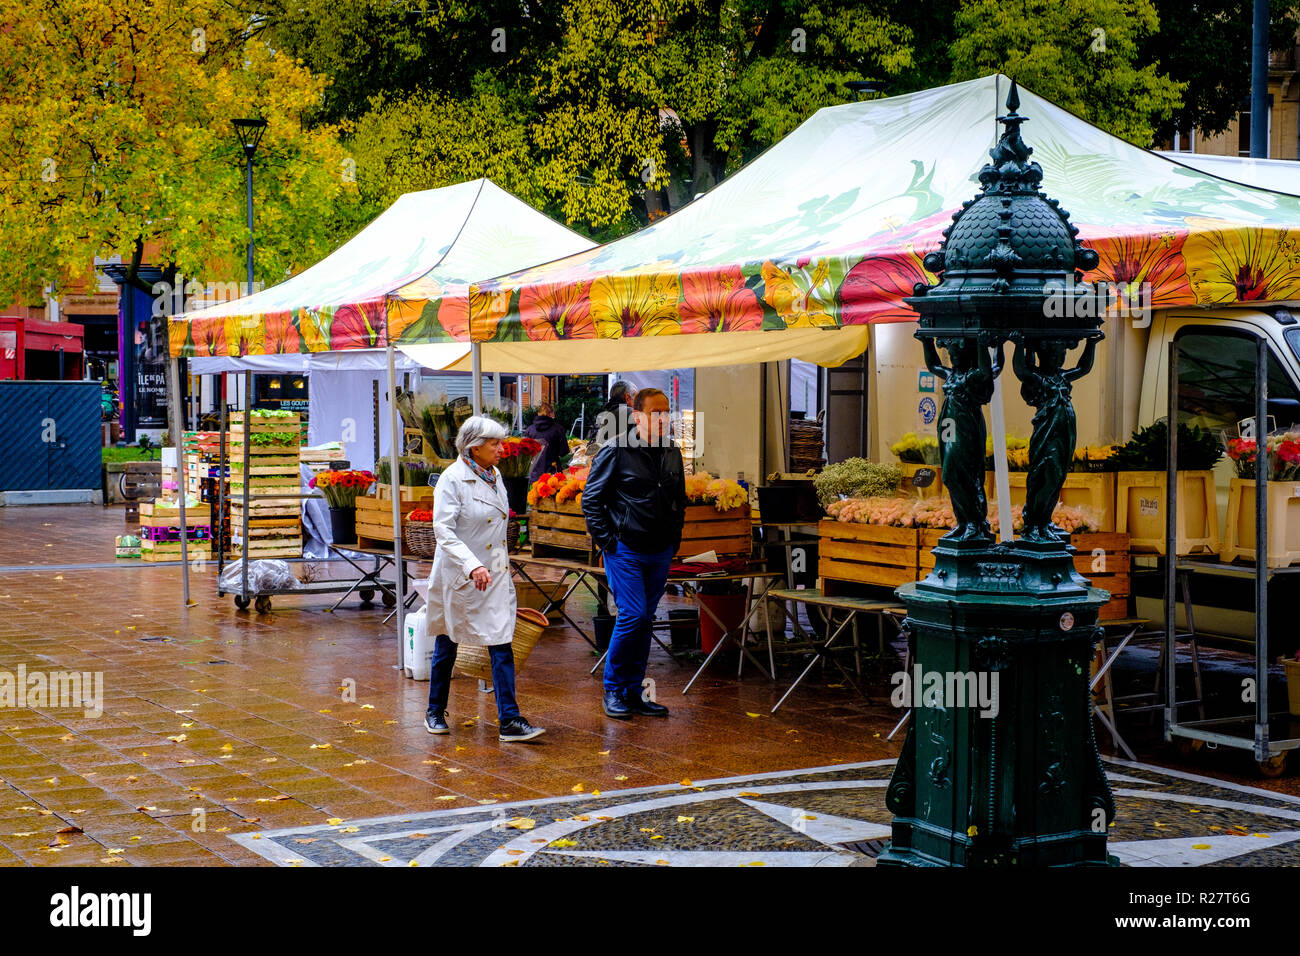 Street Market in der Place St Georges, Toulouse, Frankreich Stockfoto